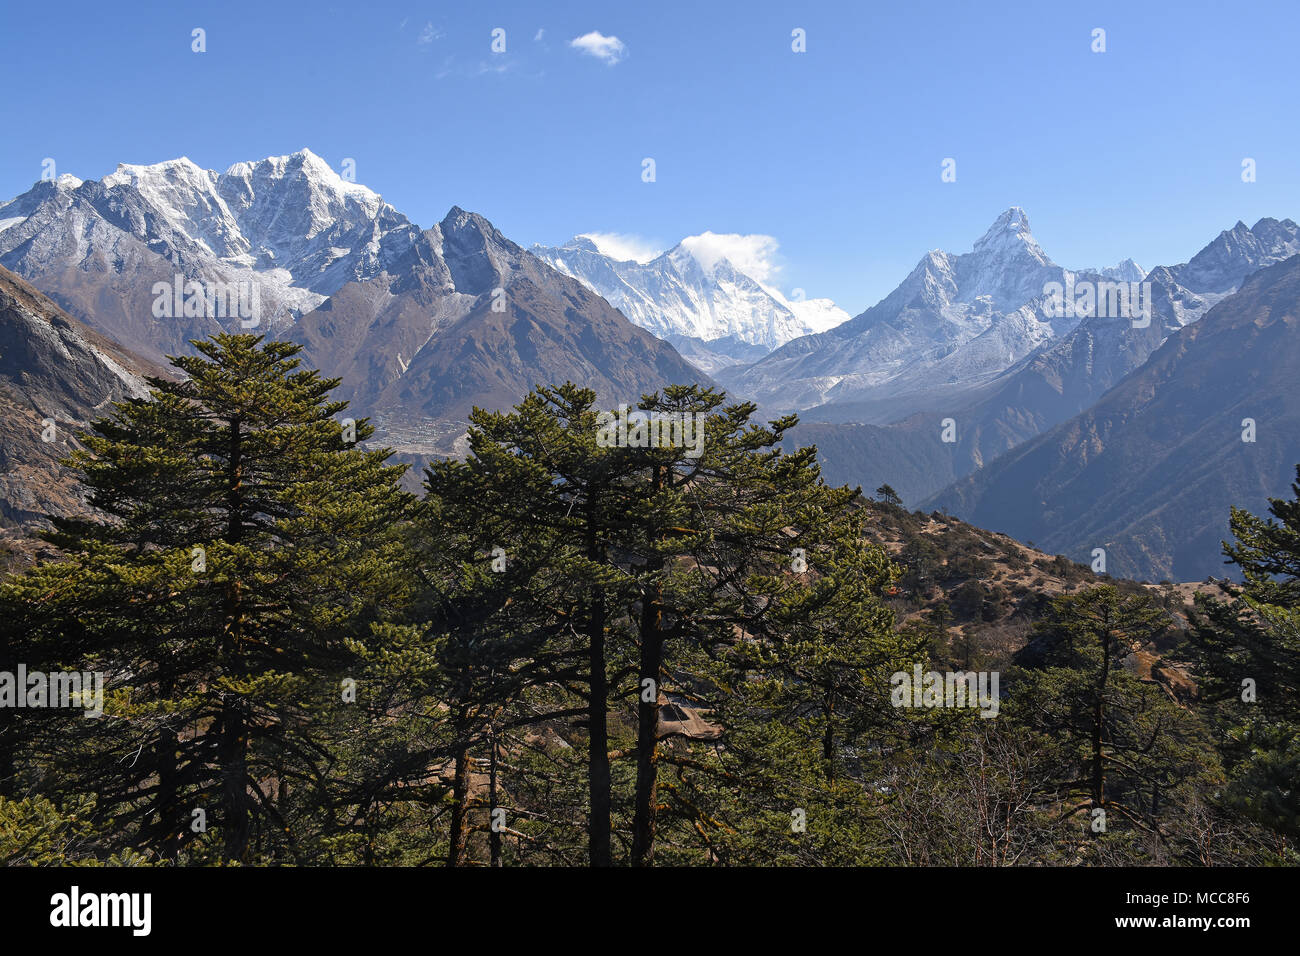 View of Everest, Lhotse, Nuptse and Ama Dablam from Khumjung, Nepal Stock Photo